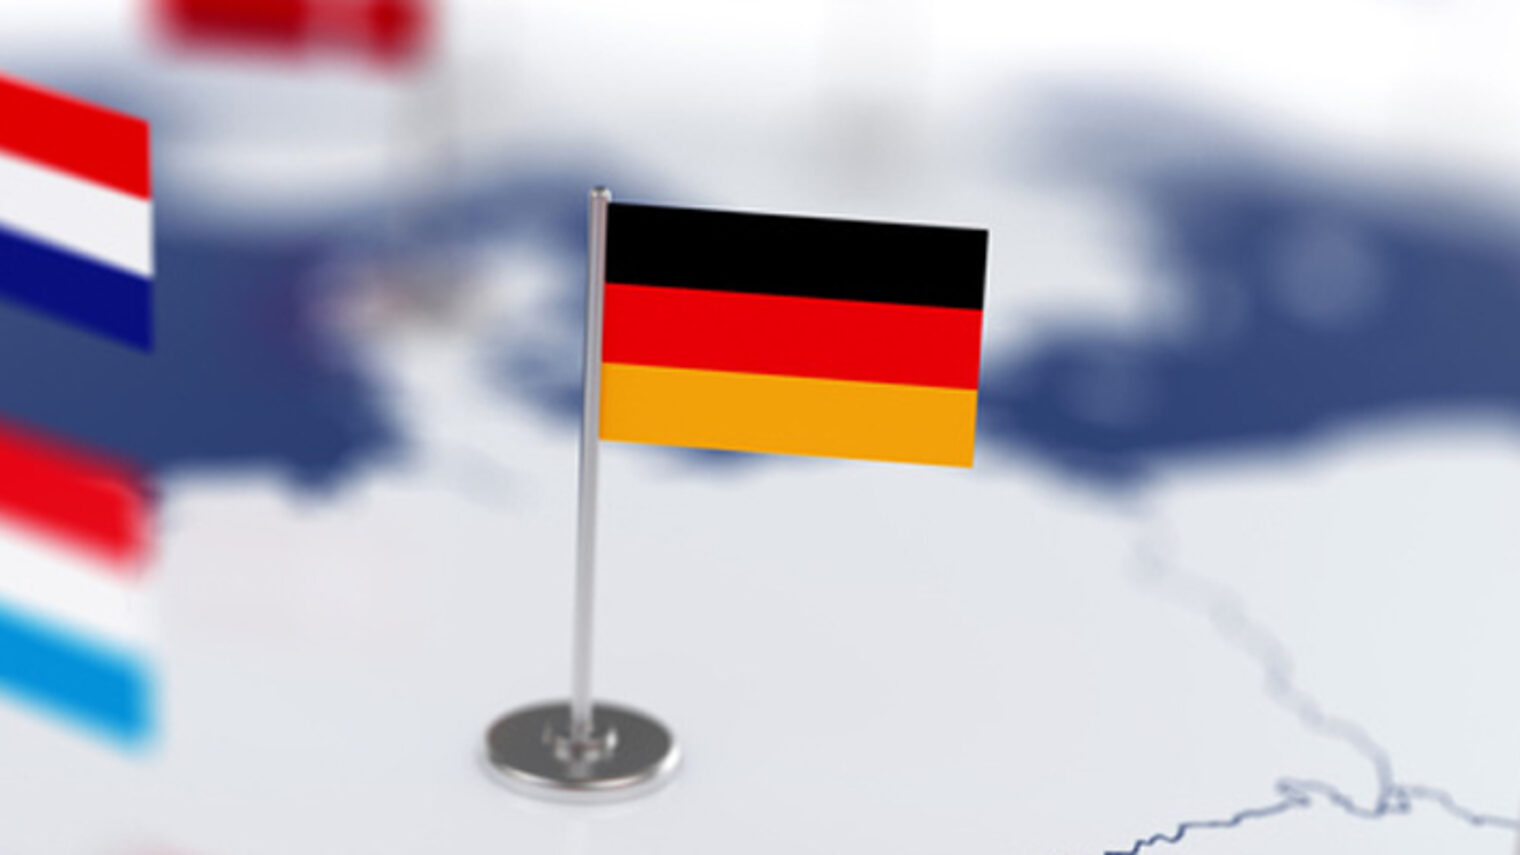 Germany flag in the focus. Europe map with countries flags. Shallow depth of field 3d illustration rendering isolated on white background Schlagwort(e): Germany, flag, european, map, white, world, union, international, concept, atlas, travel, business, symbol, politics, european union, sign, emblem, conceptual, group, political, dof, depth of field, soft focus, shallow depth of field, rendering, continent, illustration, cartography, design, eu, country, countries, geography, land, isolated, economy, national, earth, location, united, nation, blue, global, border, icon, outline, set, globe, europe, 3d